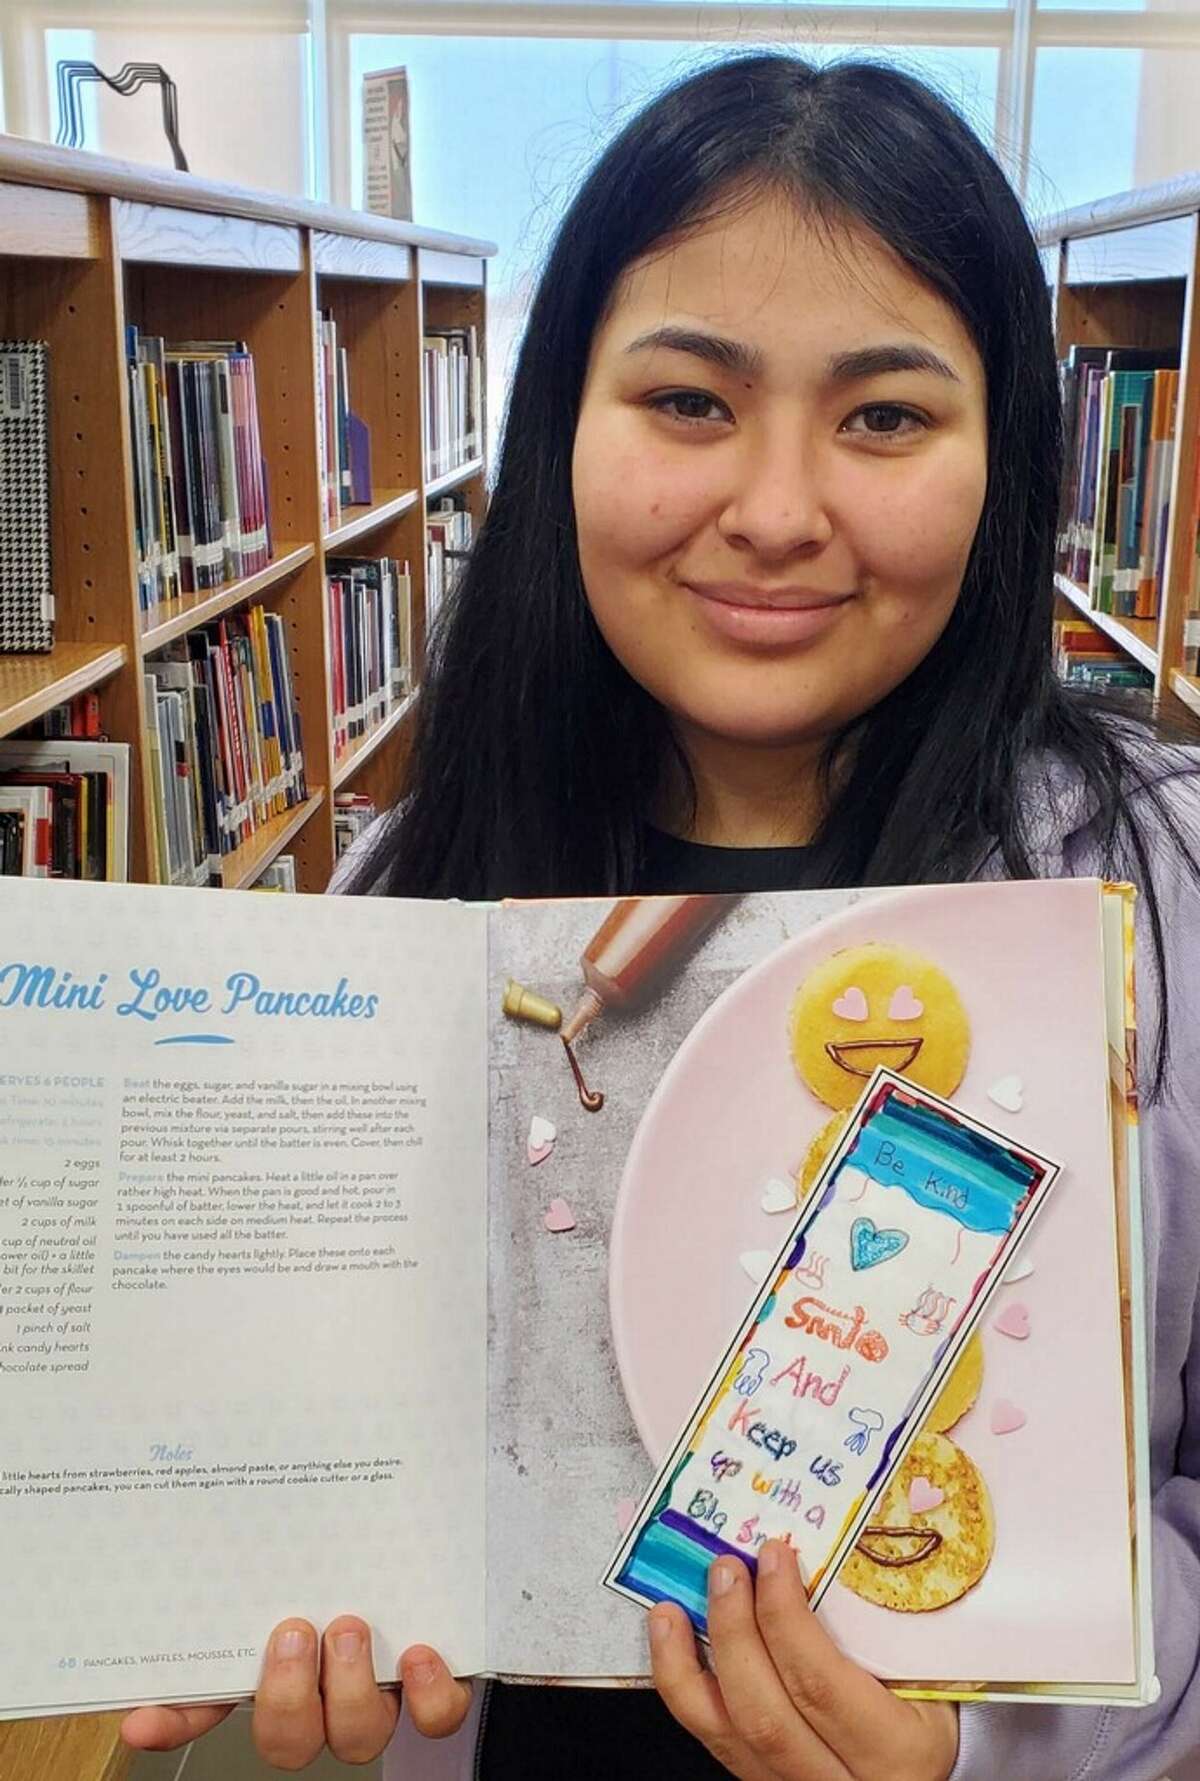 English I Pre-AP students at LBJ High School's ninth grade campus participated in Random Acts of Kindness Day on Friday, Feb. 17 by designing bookmarks with positive messages and leaving them in books for others to discover.